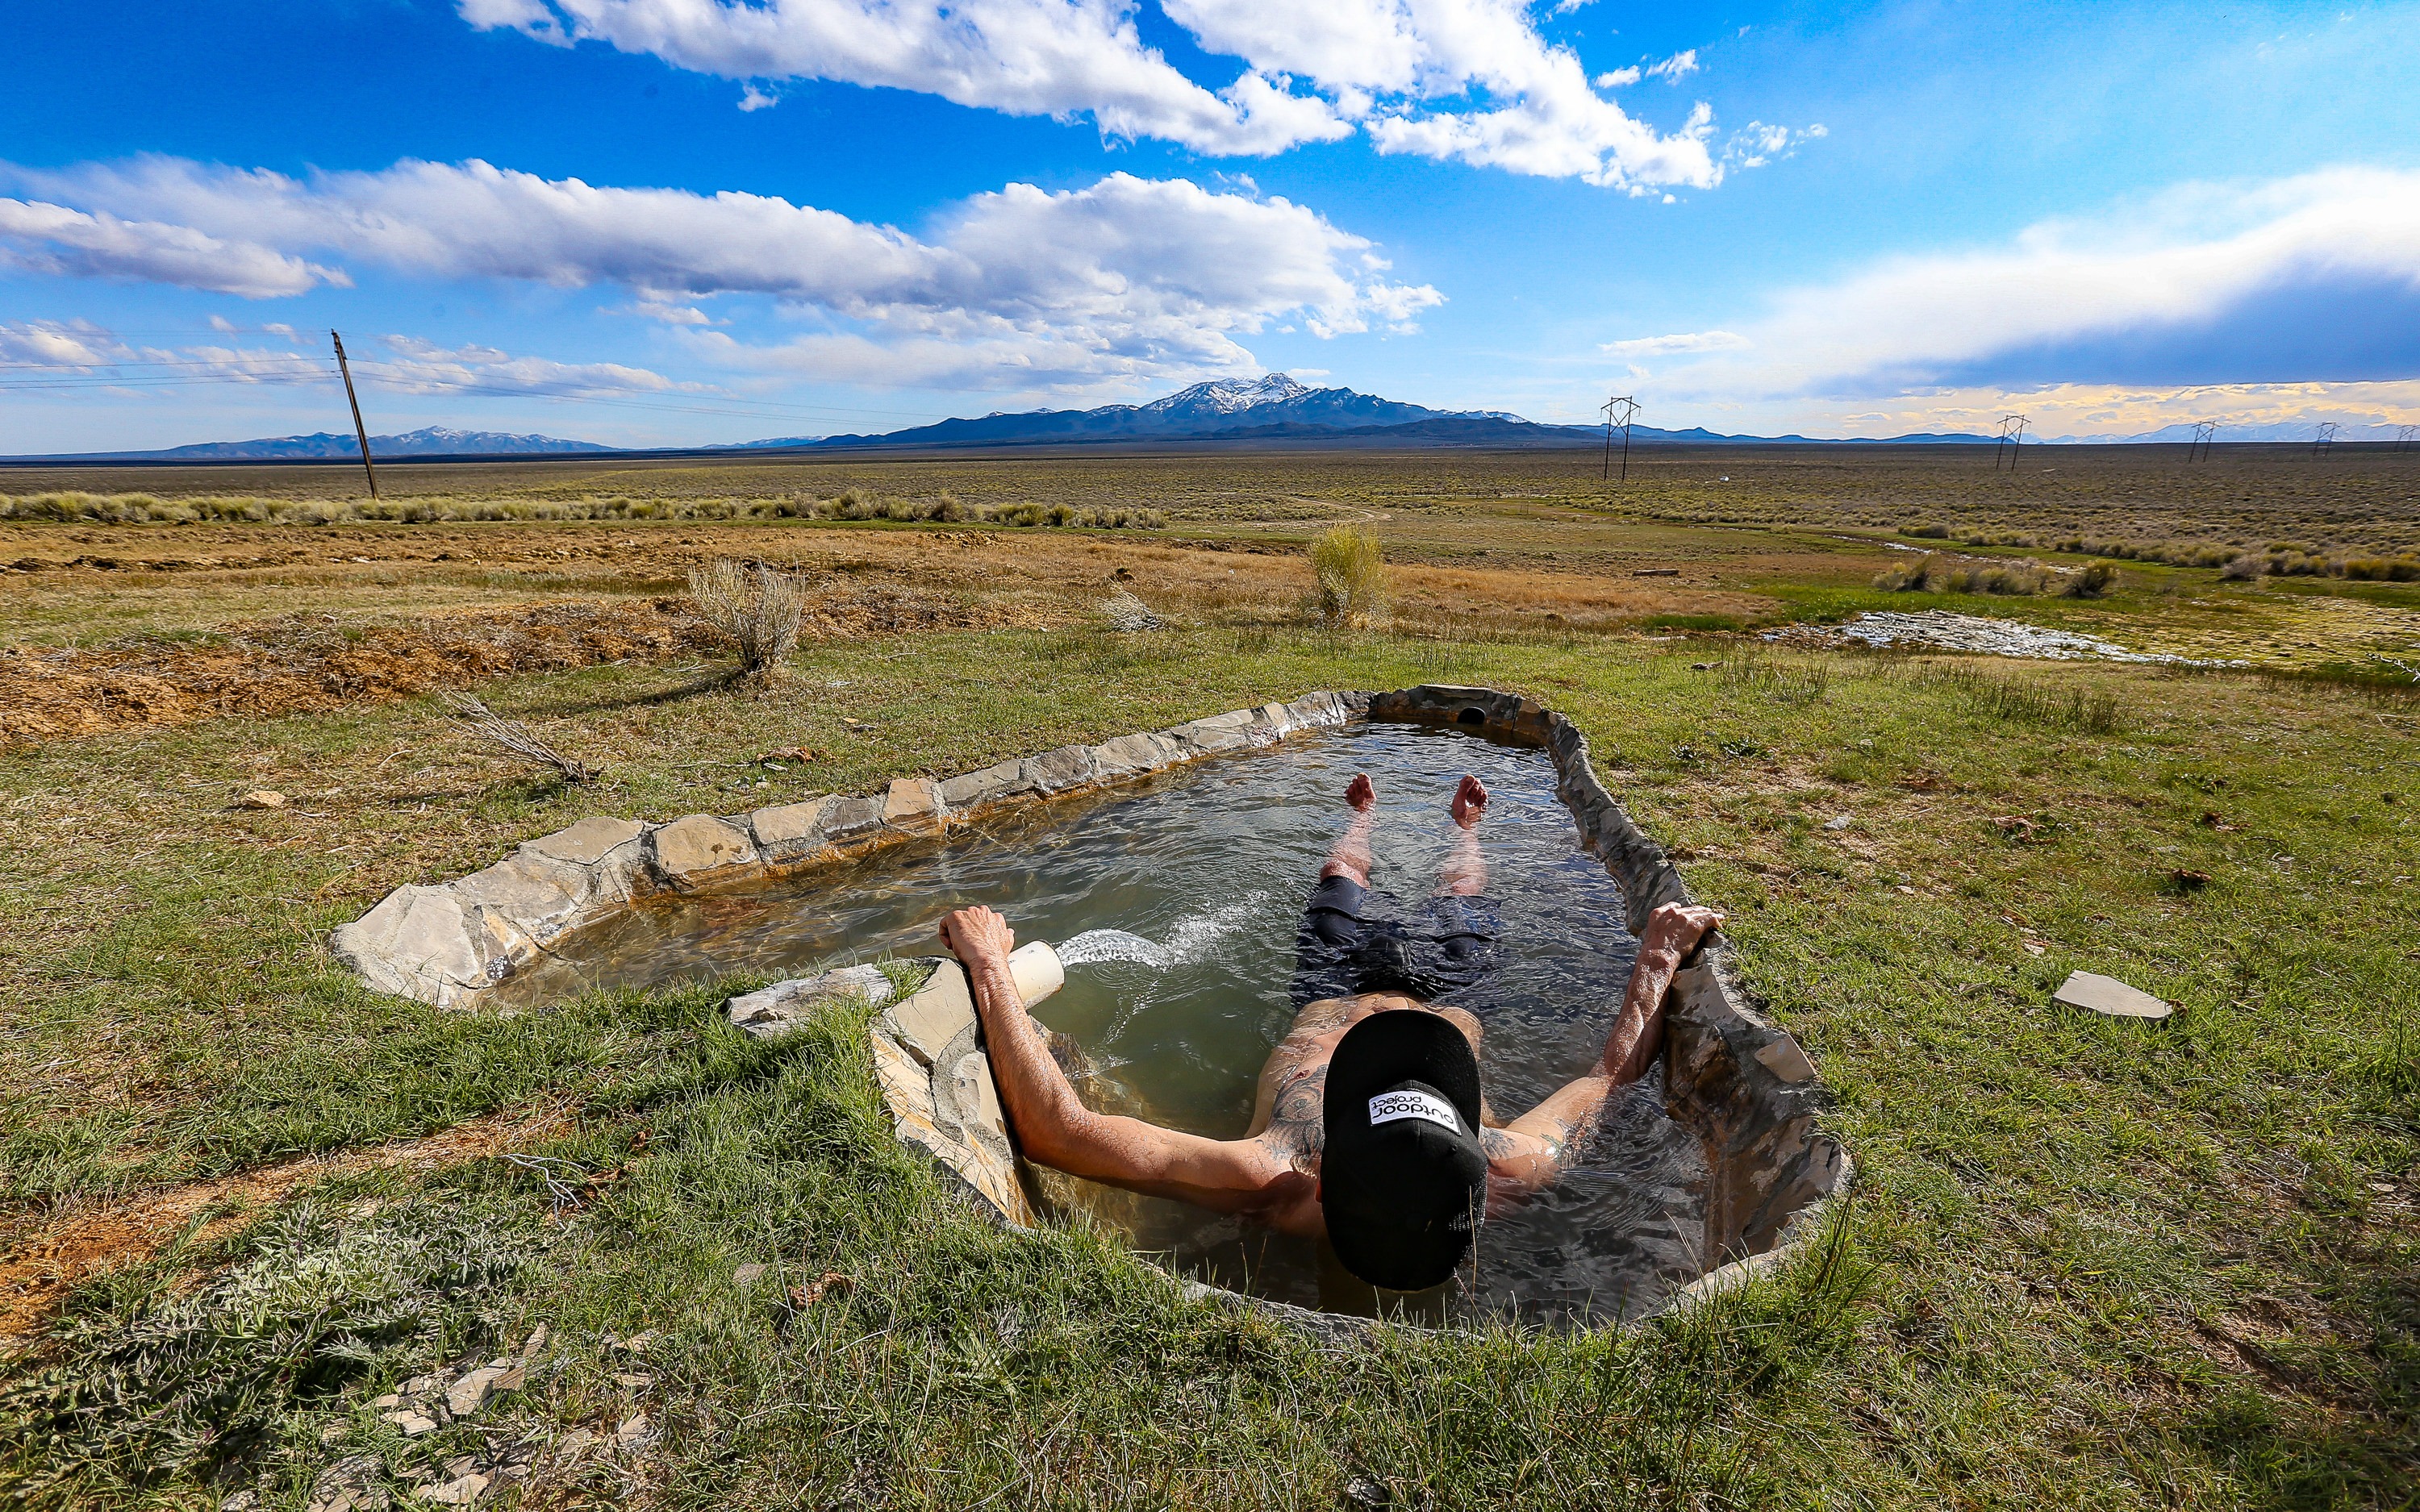 Group Nudist Pool - The Naked Truth About Hot Springs | Outdoor Project